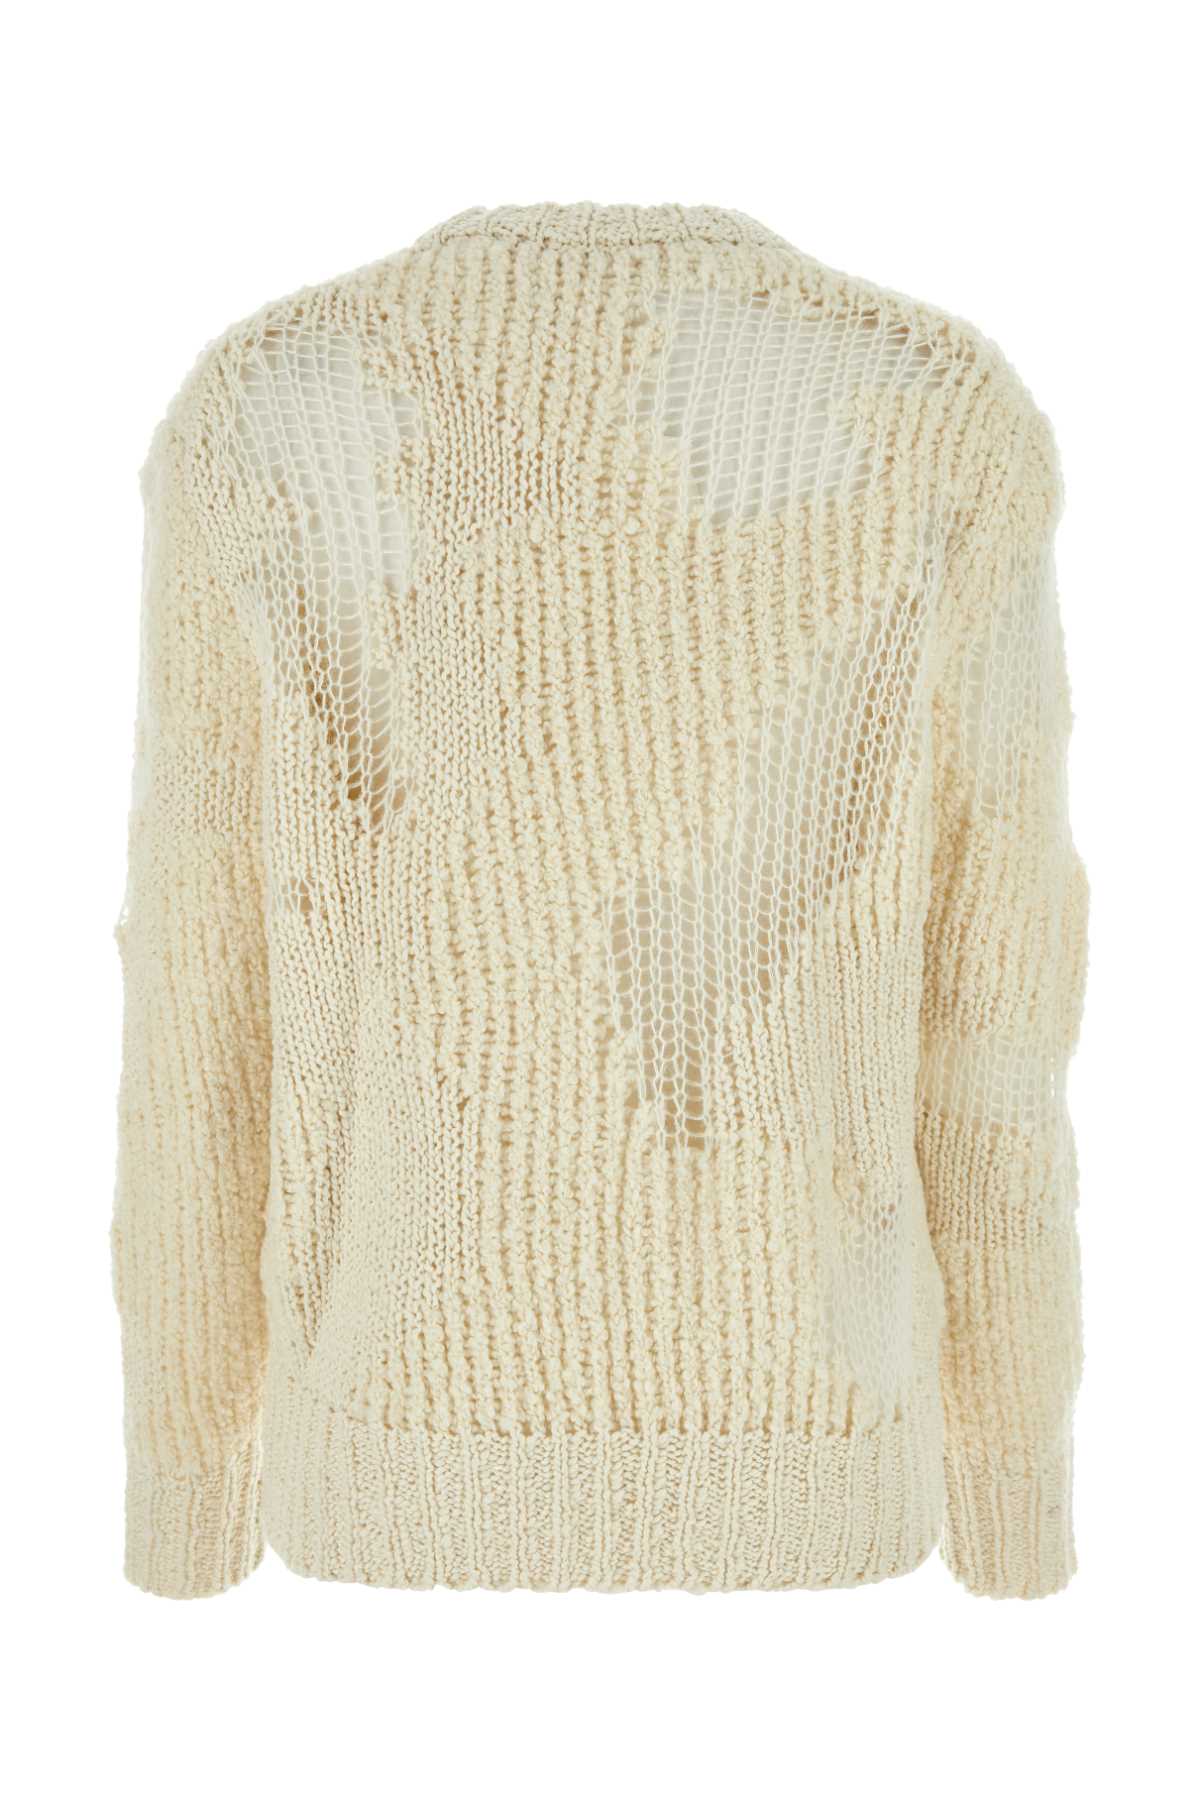 Shop Chloé Ivory Wool Blend Sweater In Iconicmilk